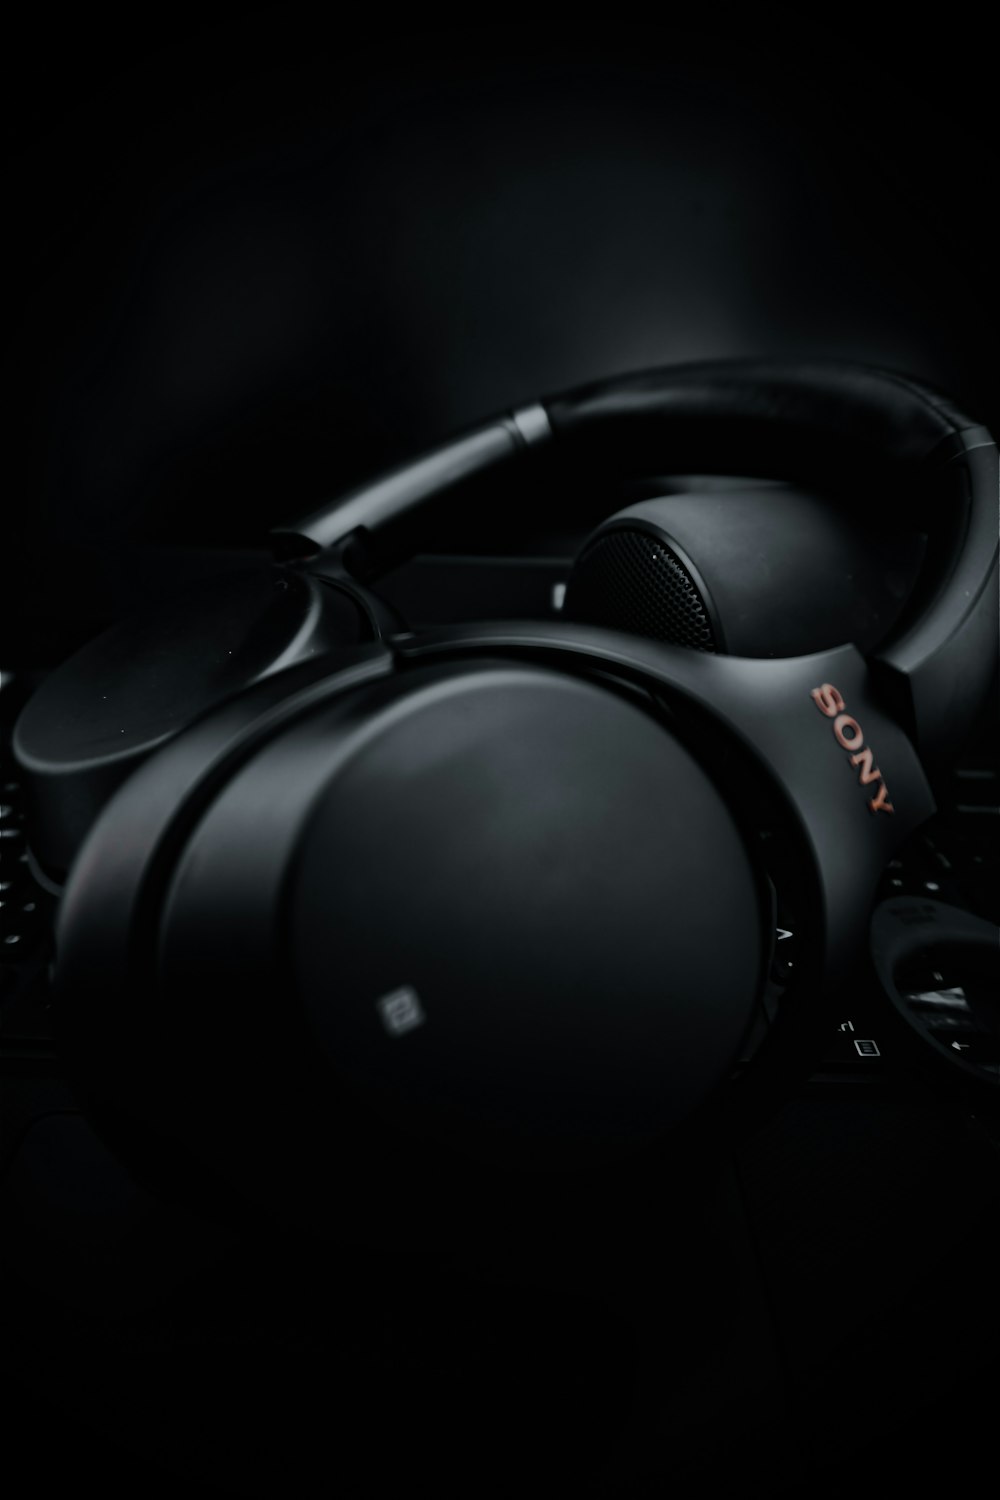 black and gray headphones on black surface